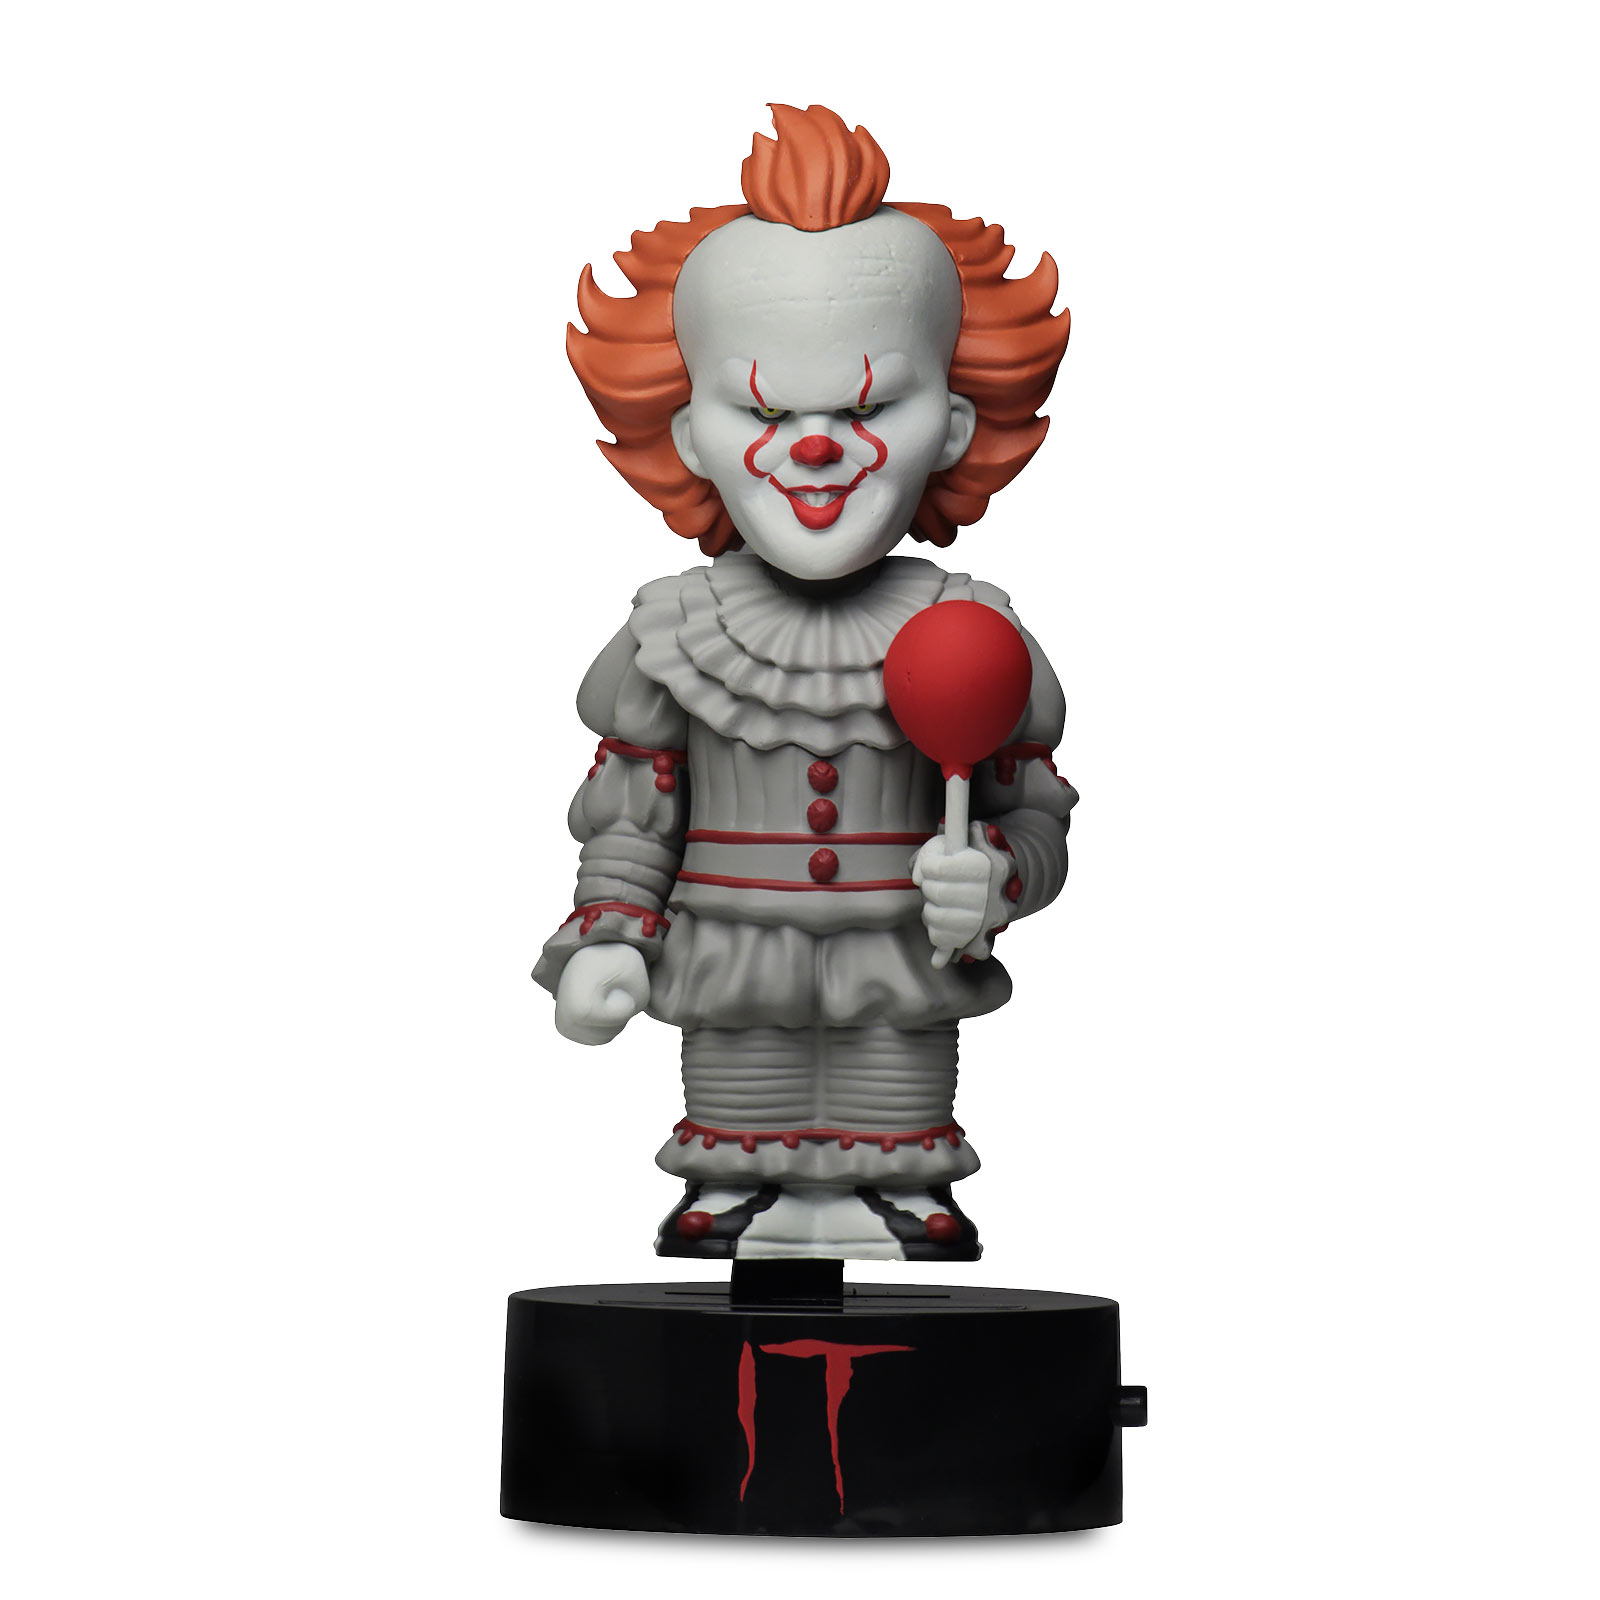 Stephen King's IT - Pennywise Body Knockers Solar Bobblehead